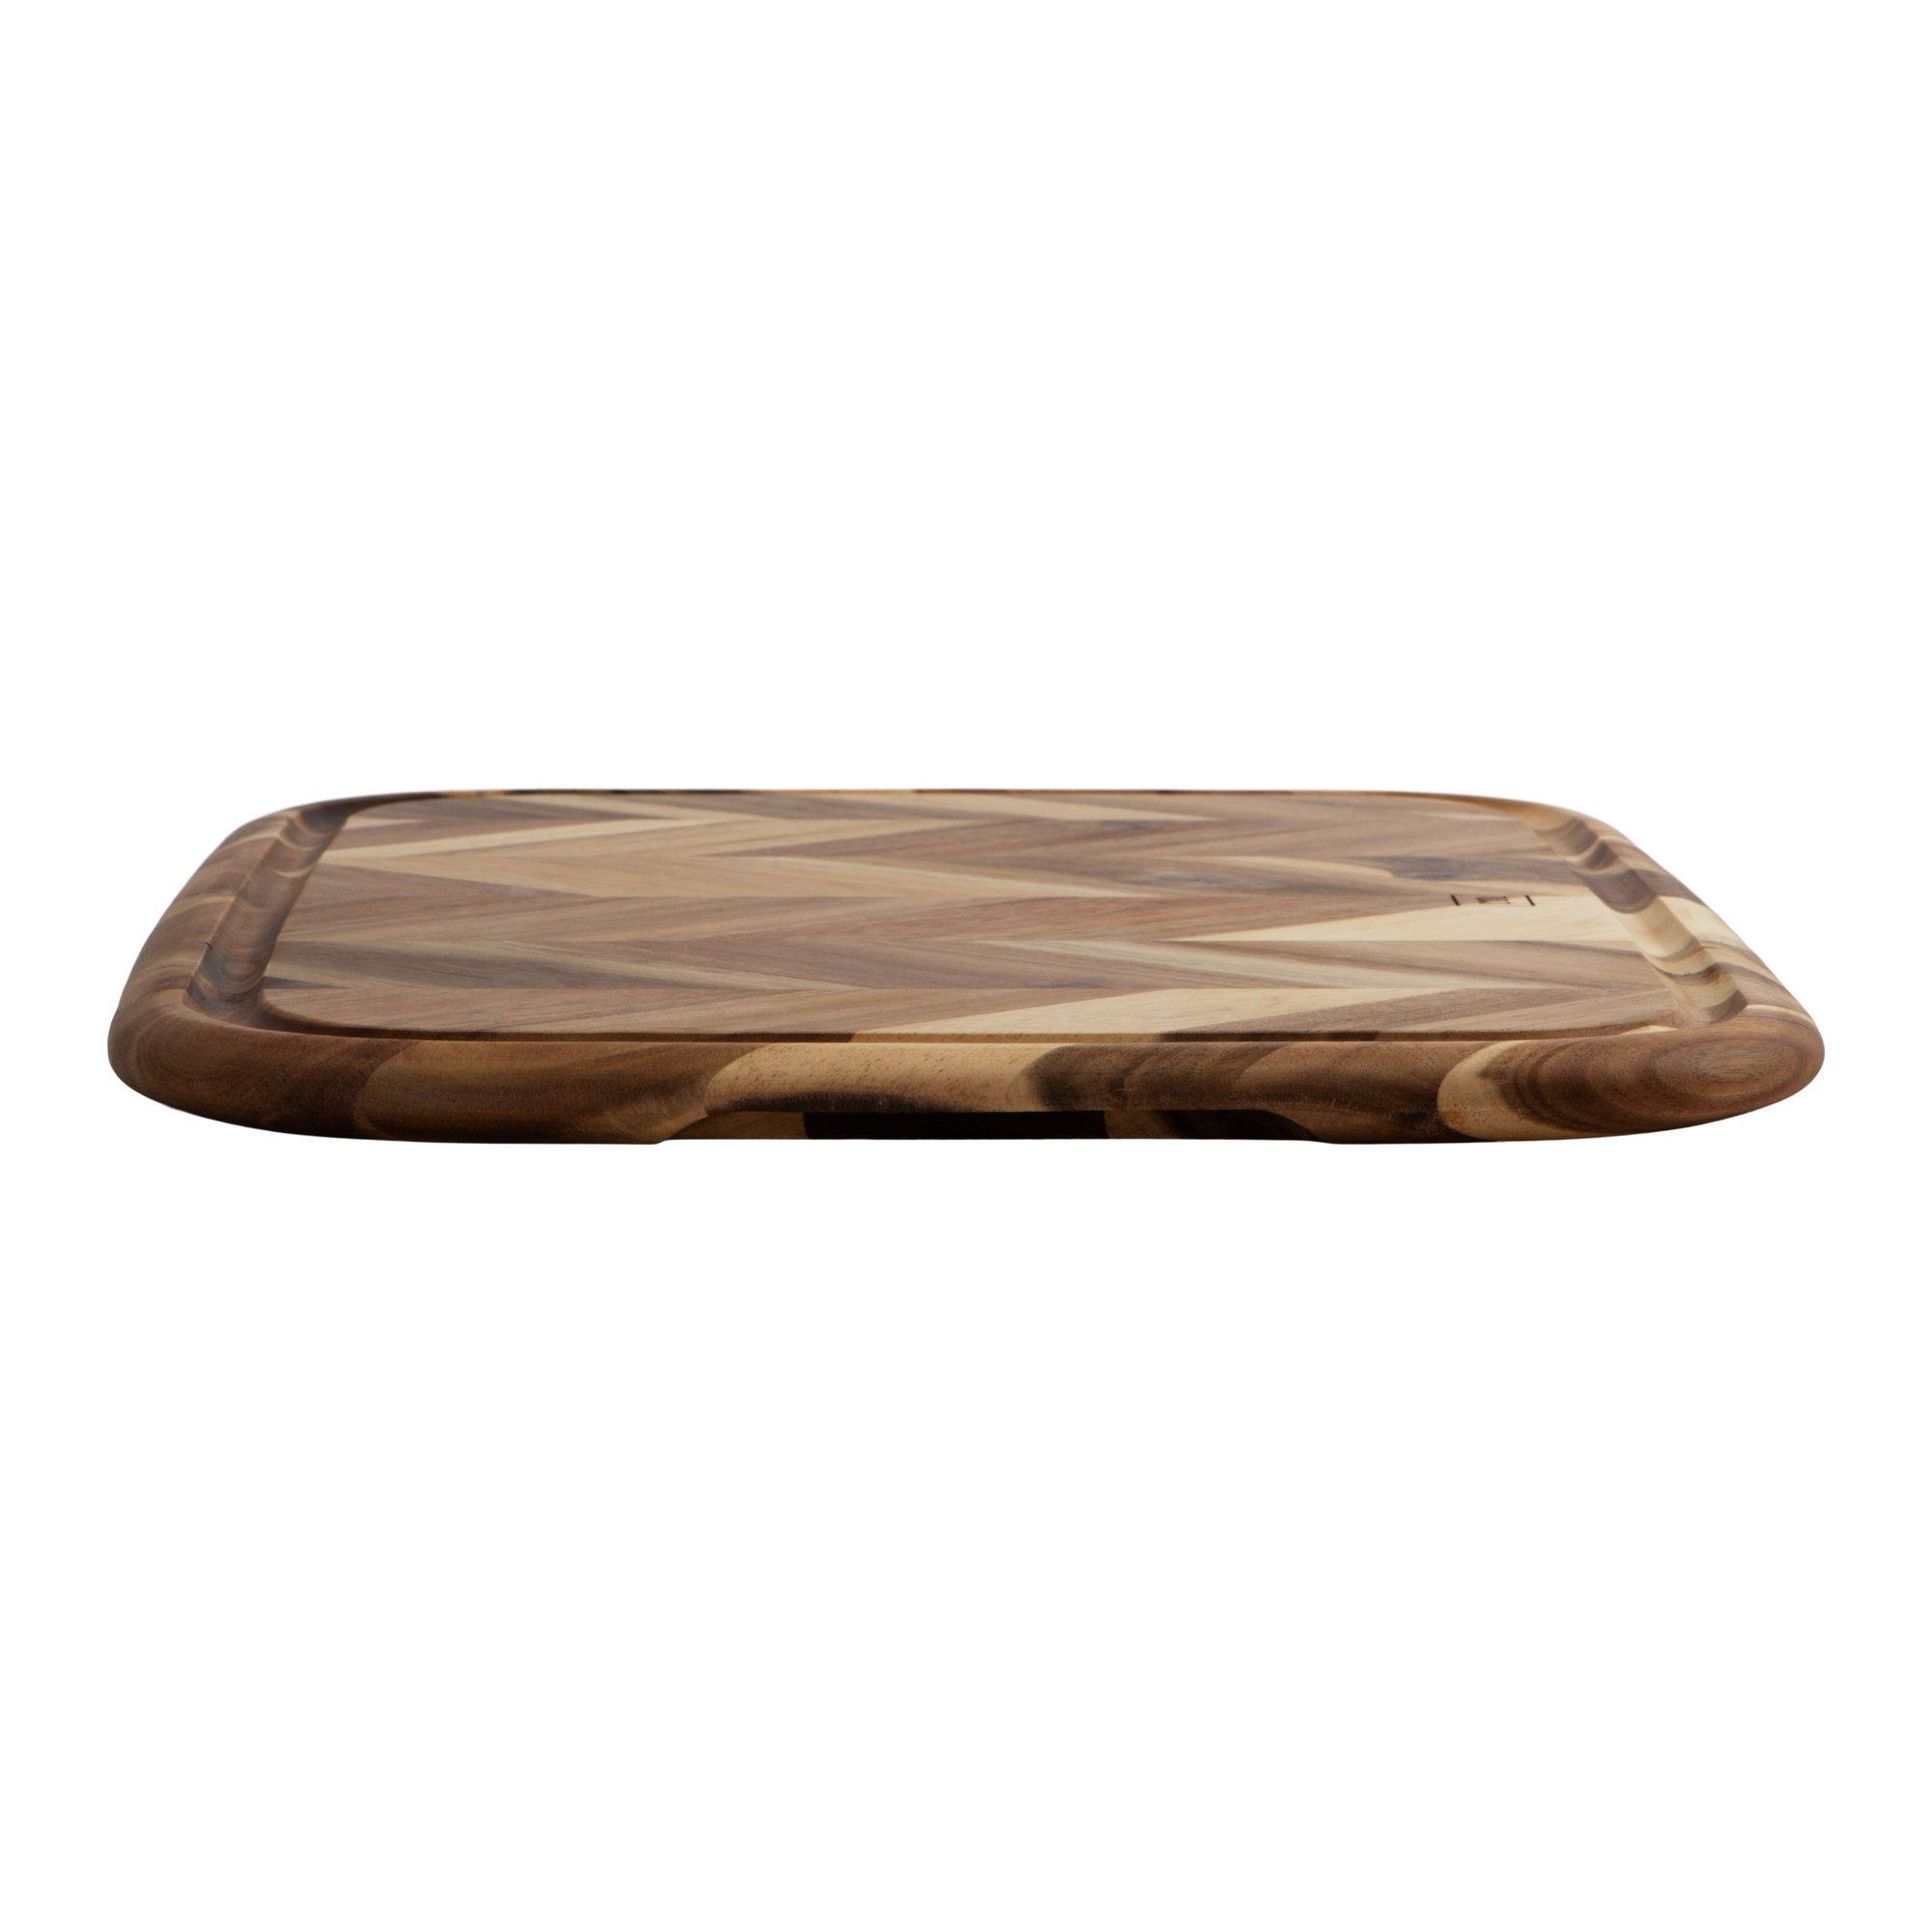 Solid Wood One Piece Ironwood Kitchen Cutting Board